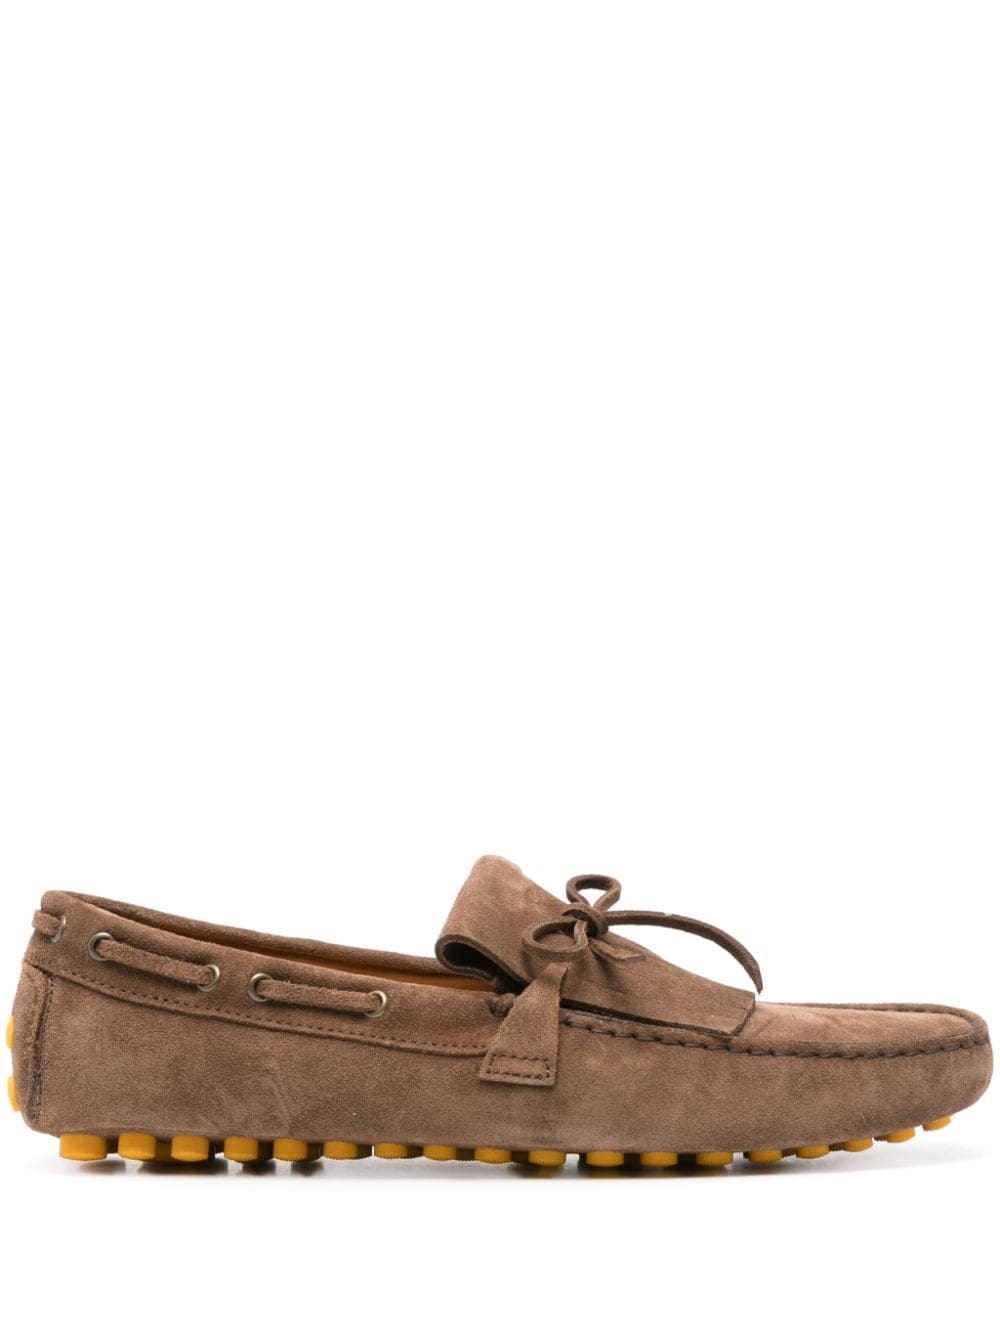 Doucal's suede boat shoes - Brown von Doucal's